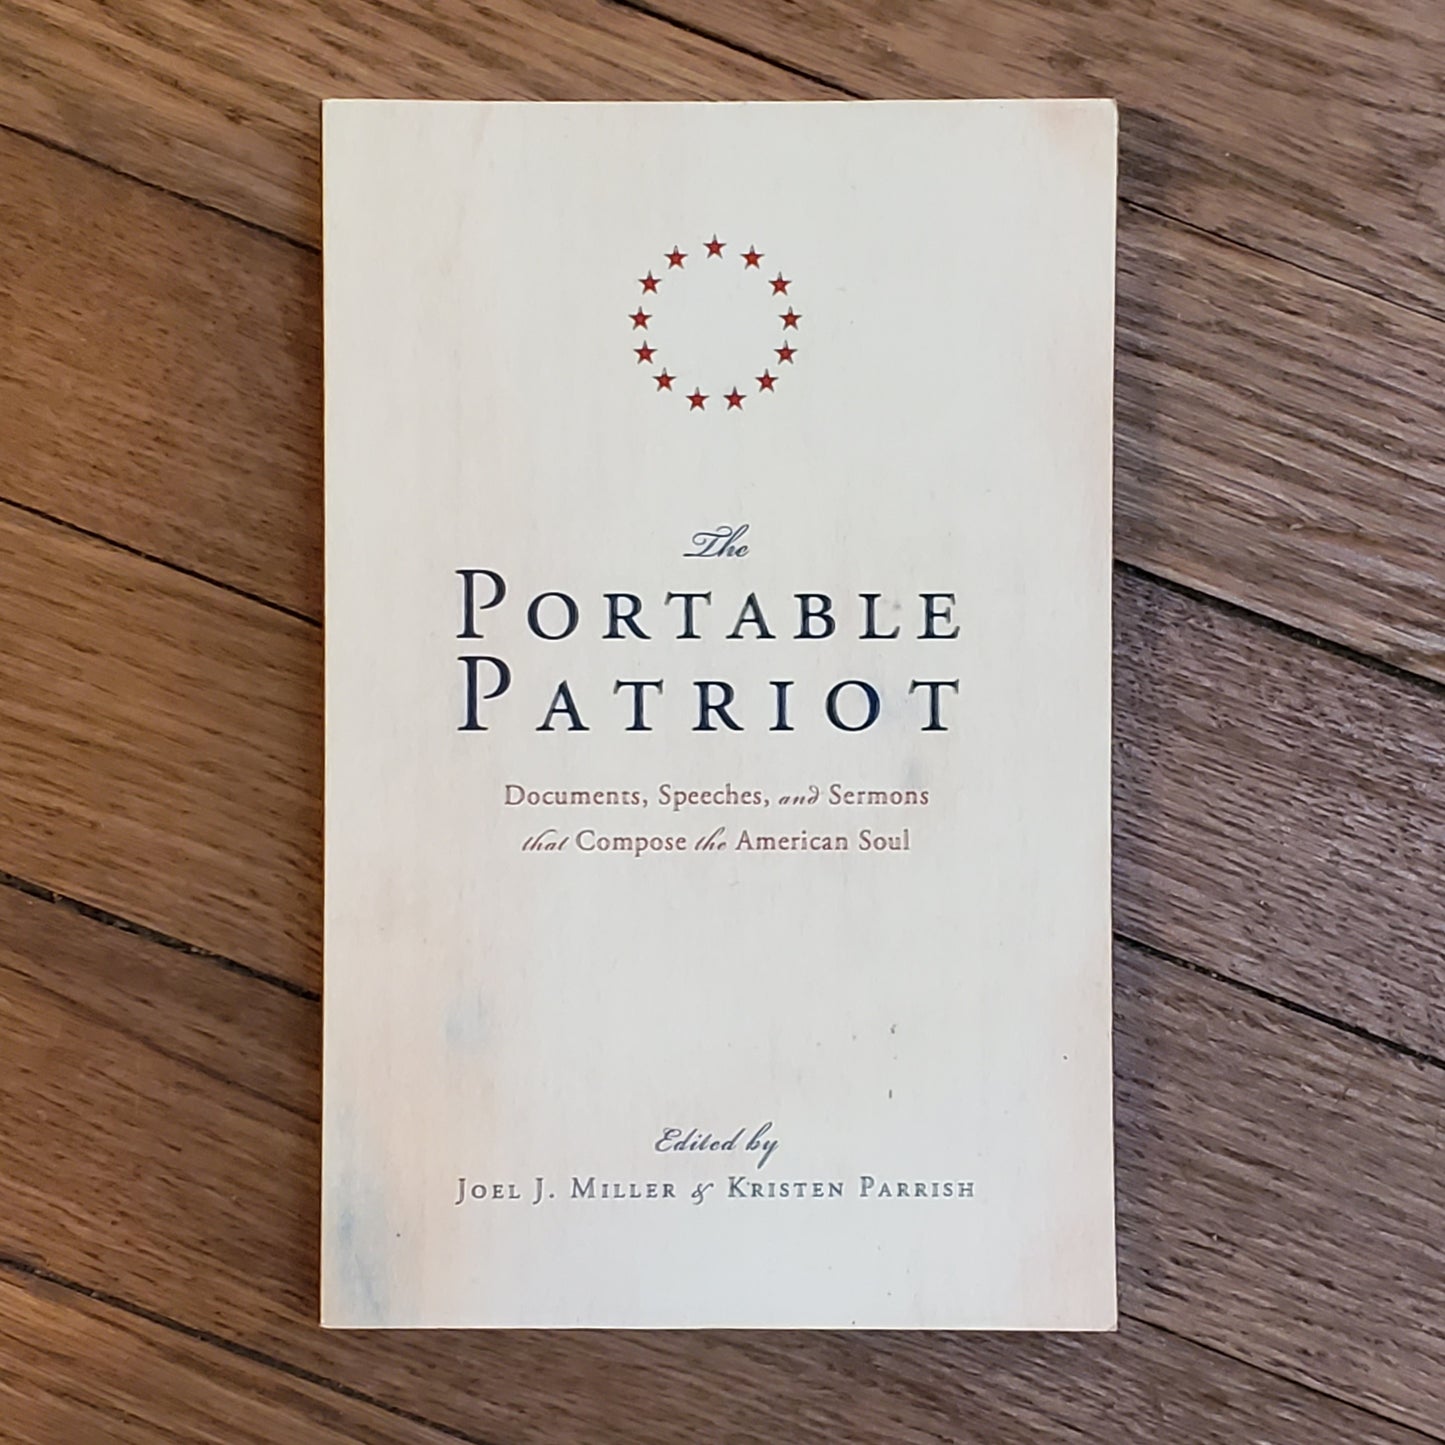 GB The Portable Patriot: Documents, Speeches, and Sermons that Compose the American Soul